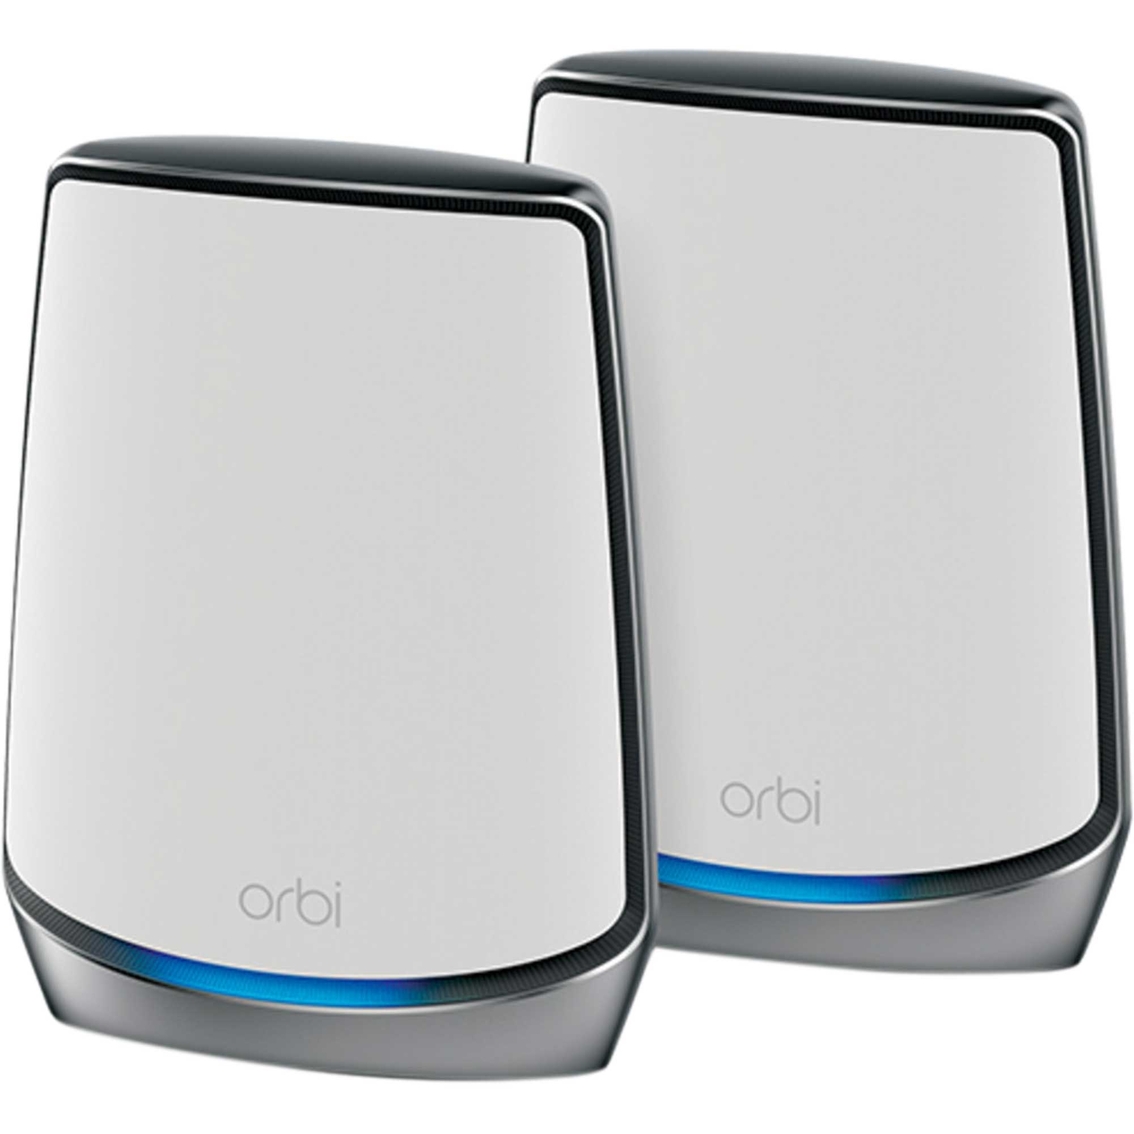 Netgear Orbi Tri-band Wifi 6 Mesh System Router With 1 Satellite